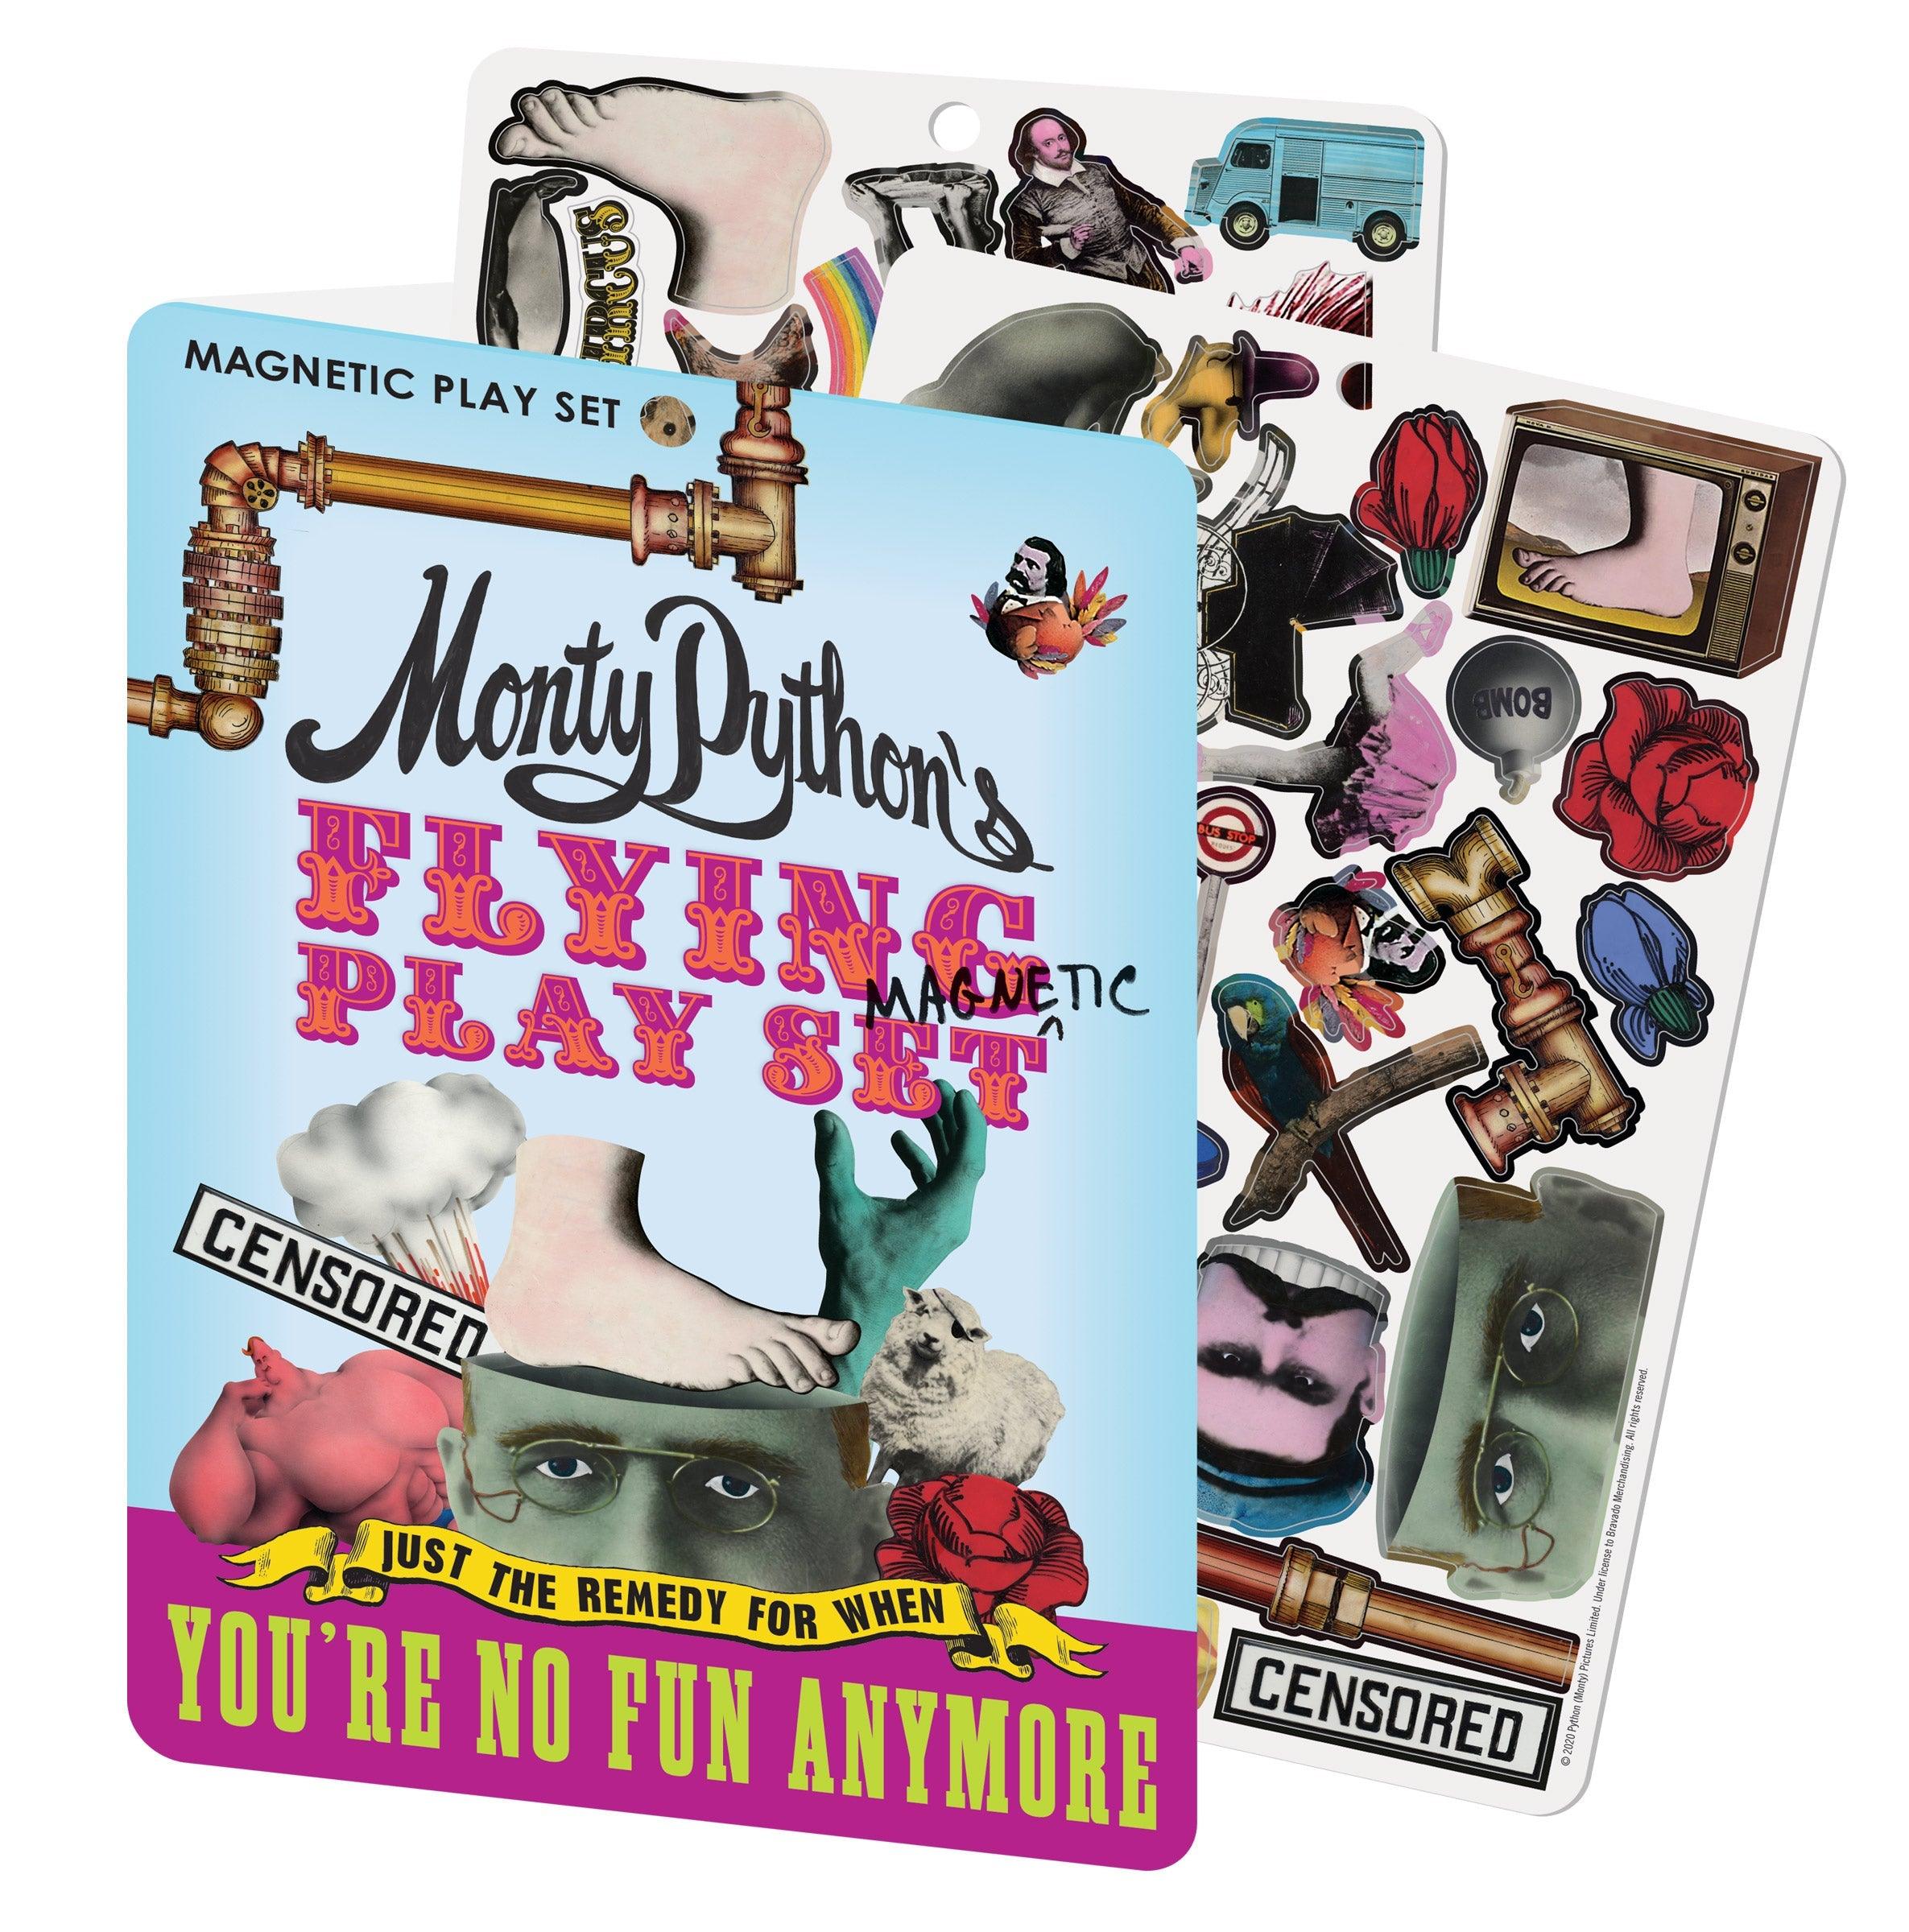 Product photo of Monty Python Magnetic Play Set, a novelty gift manufactured by The Unemployed Philosophers Guild.